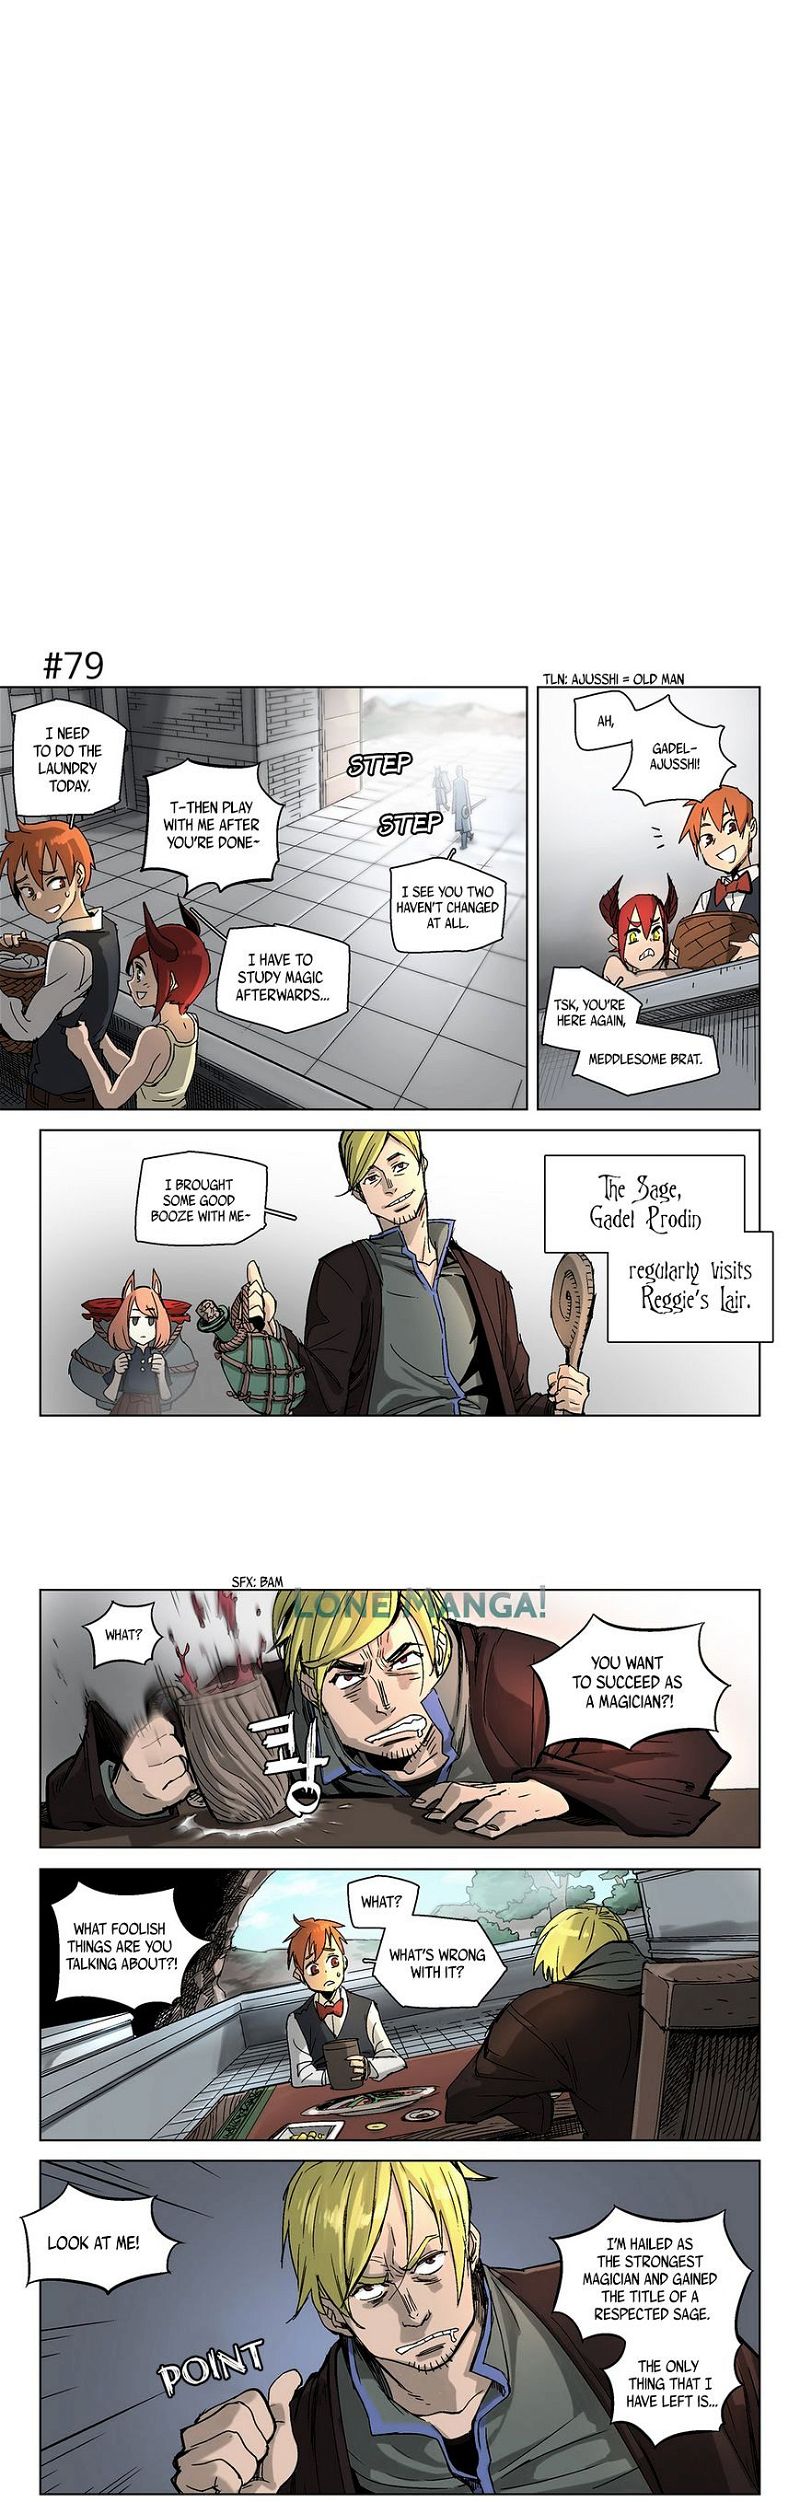 4 Cut Hero Chapter 13 page 2